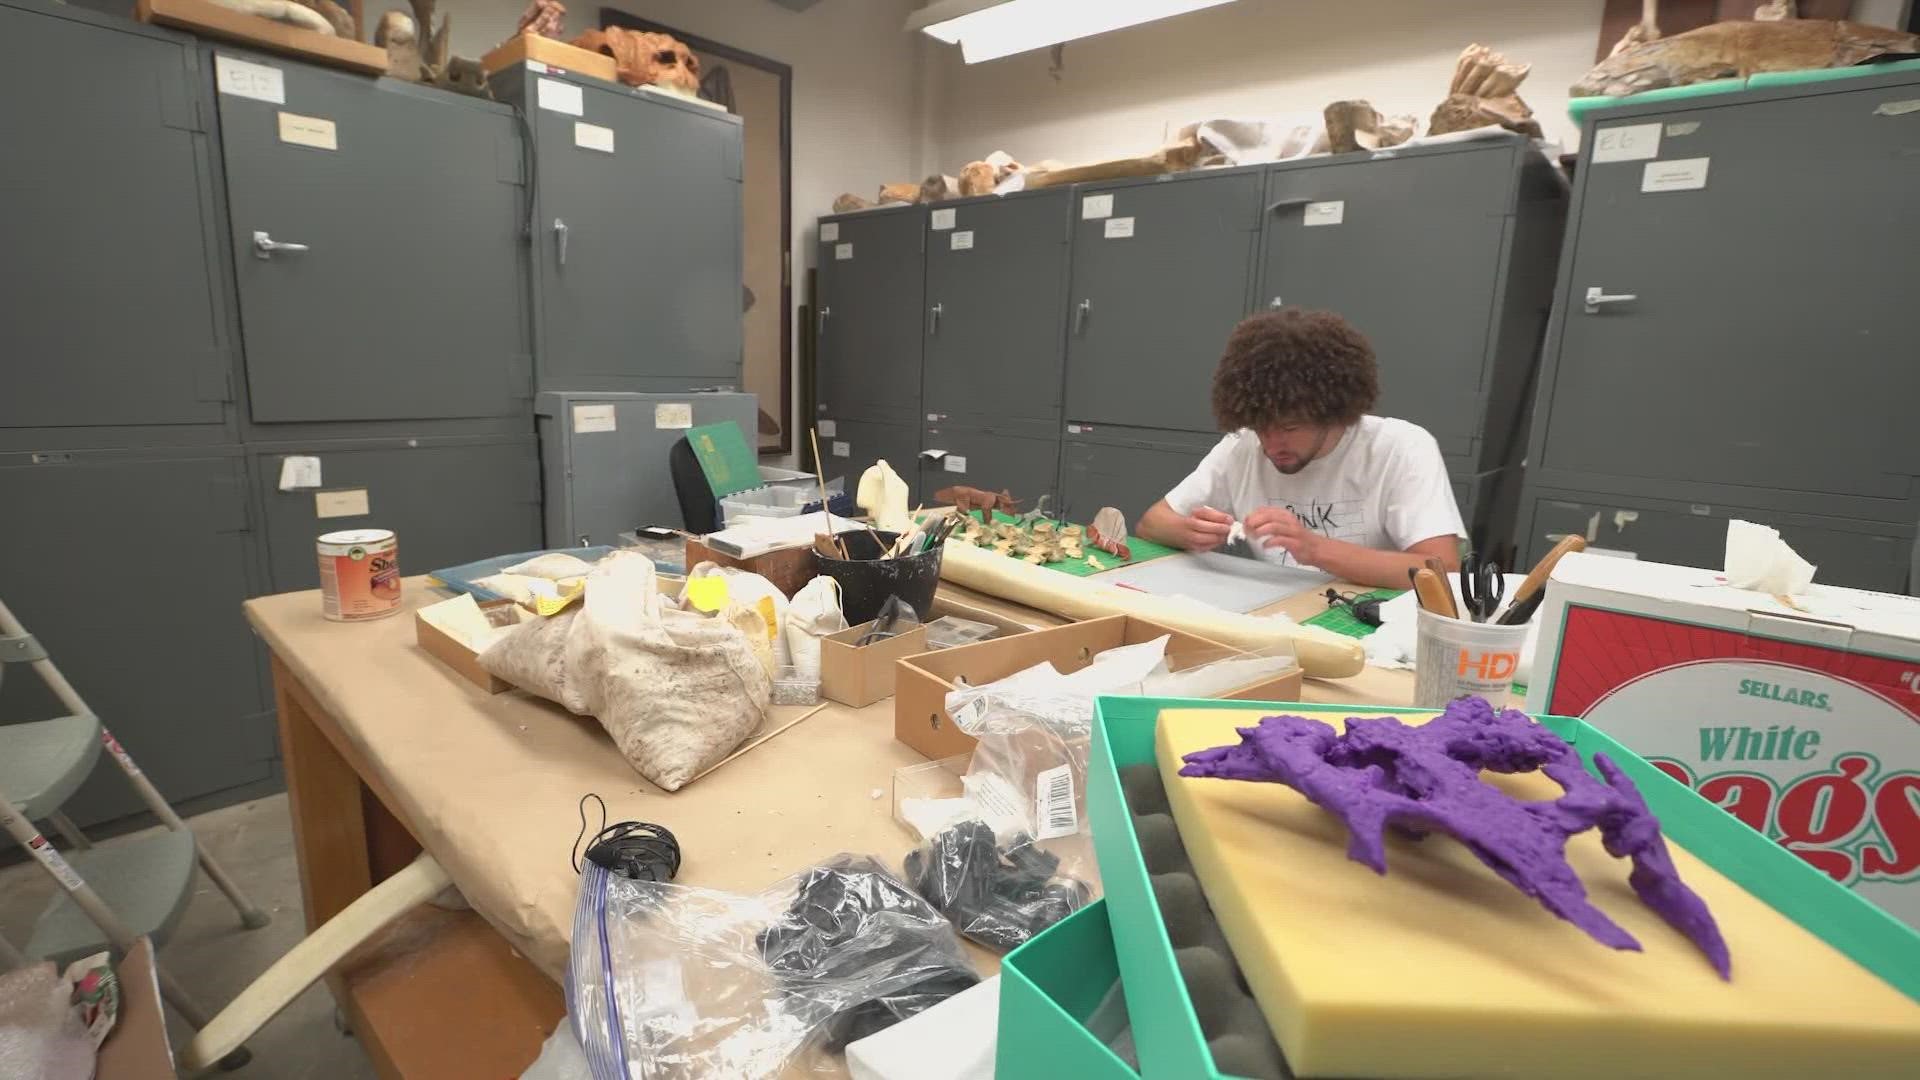 To build a successful career in paleontology, you need a passion for fossils, geology and physiology. And, if you're this SMU student, that also includes origami.